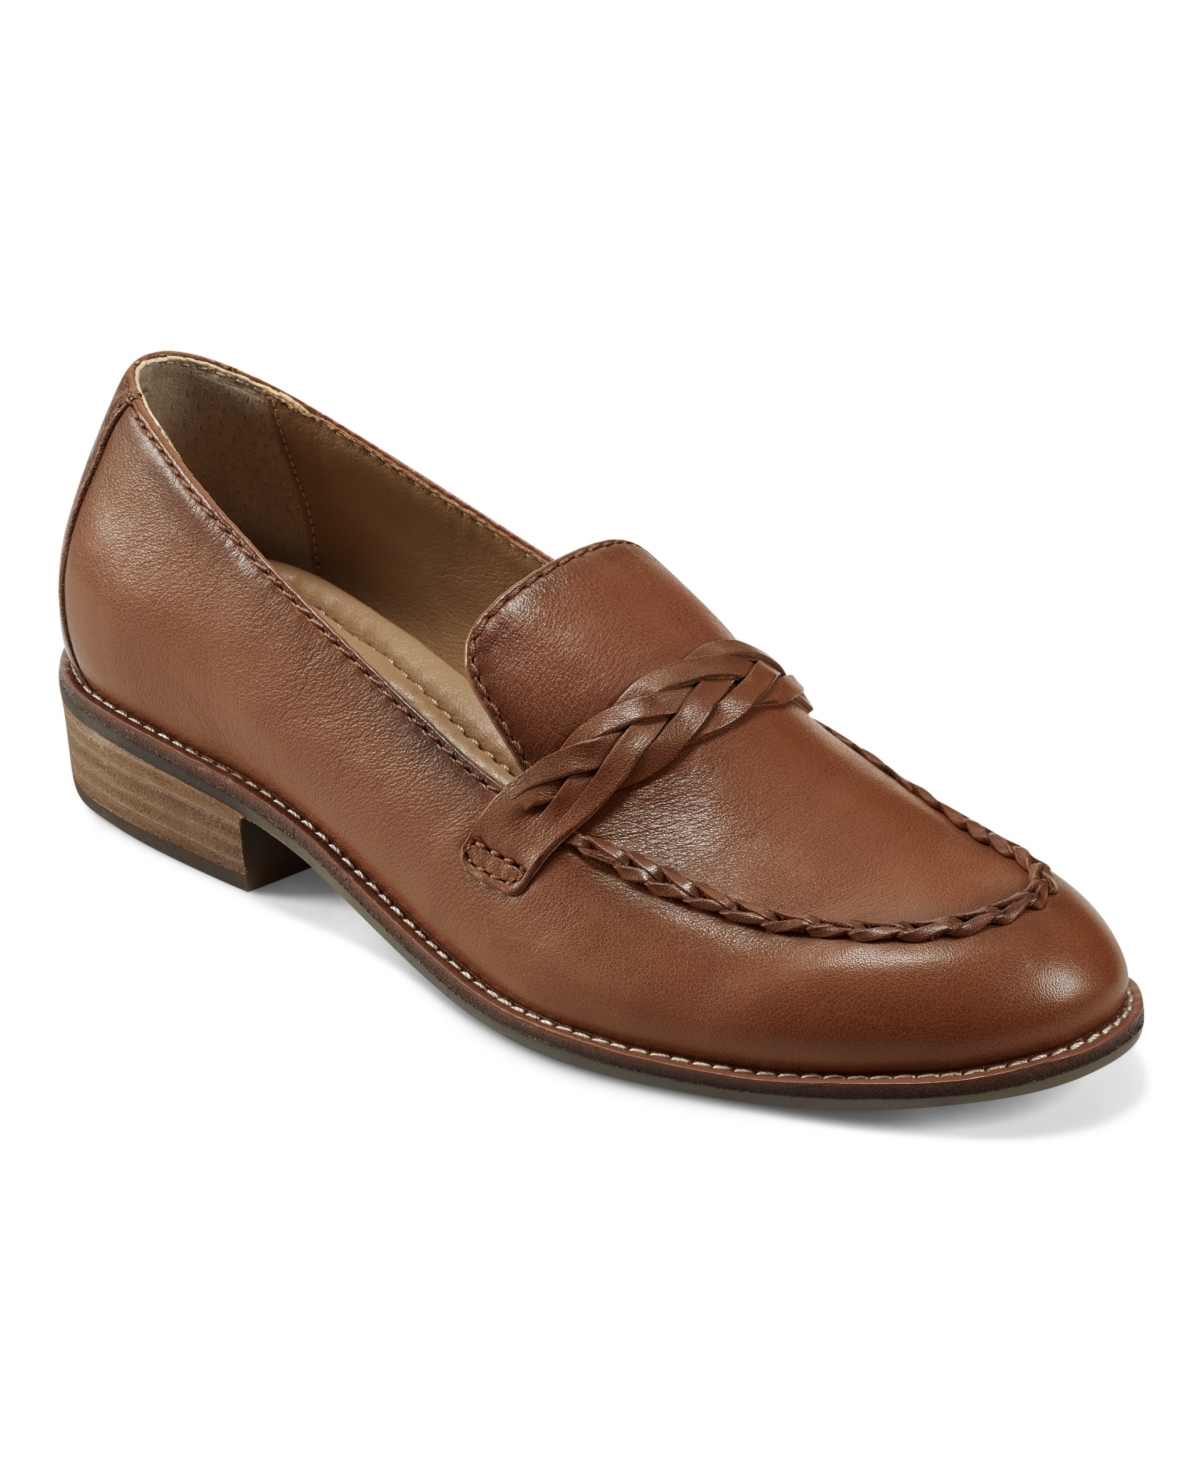 Earth Women's Edie Stacked Heel Casual Slip-on Loafers In Medium Brown Leather